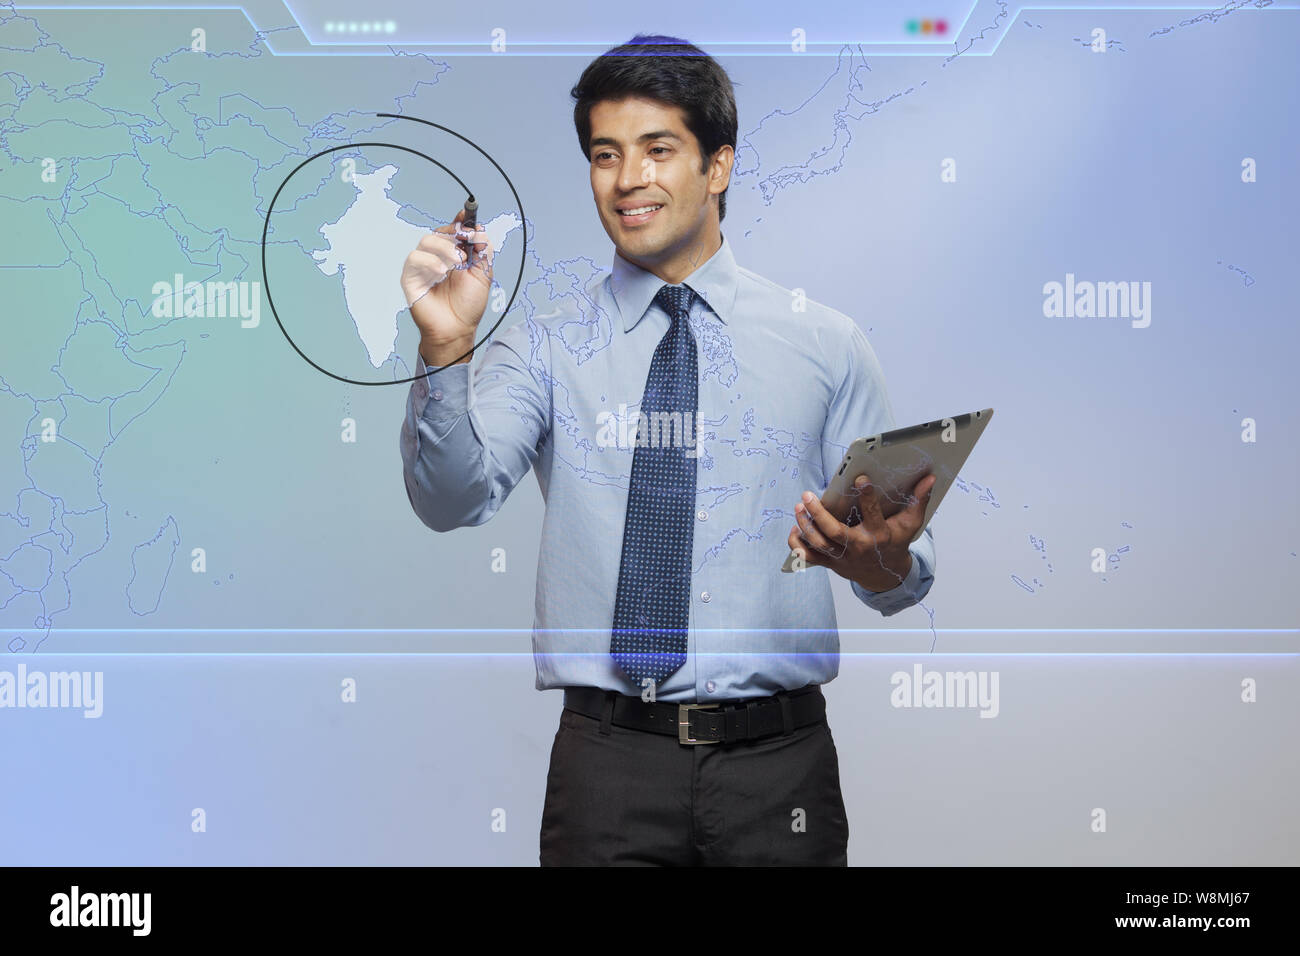 Businessman marking India in touch screen and holding a digital tablet Stock Photo